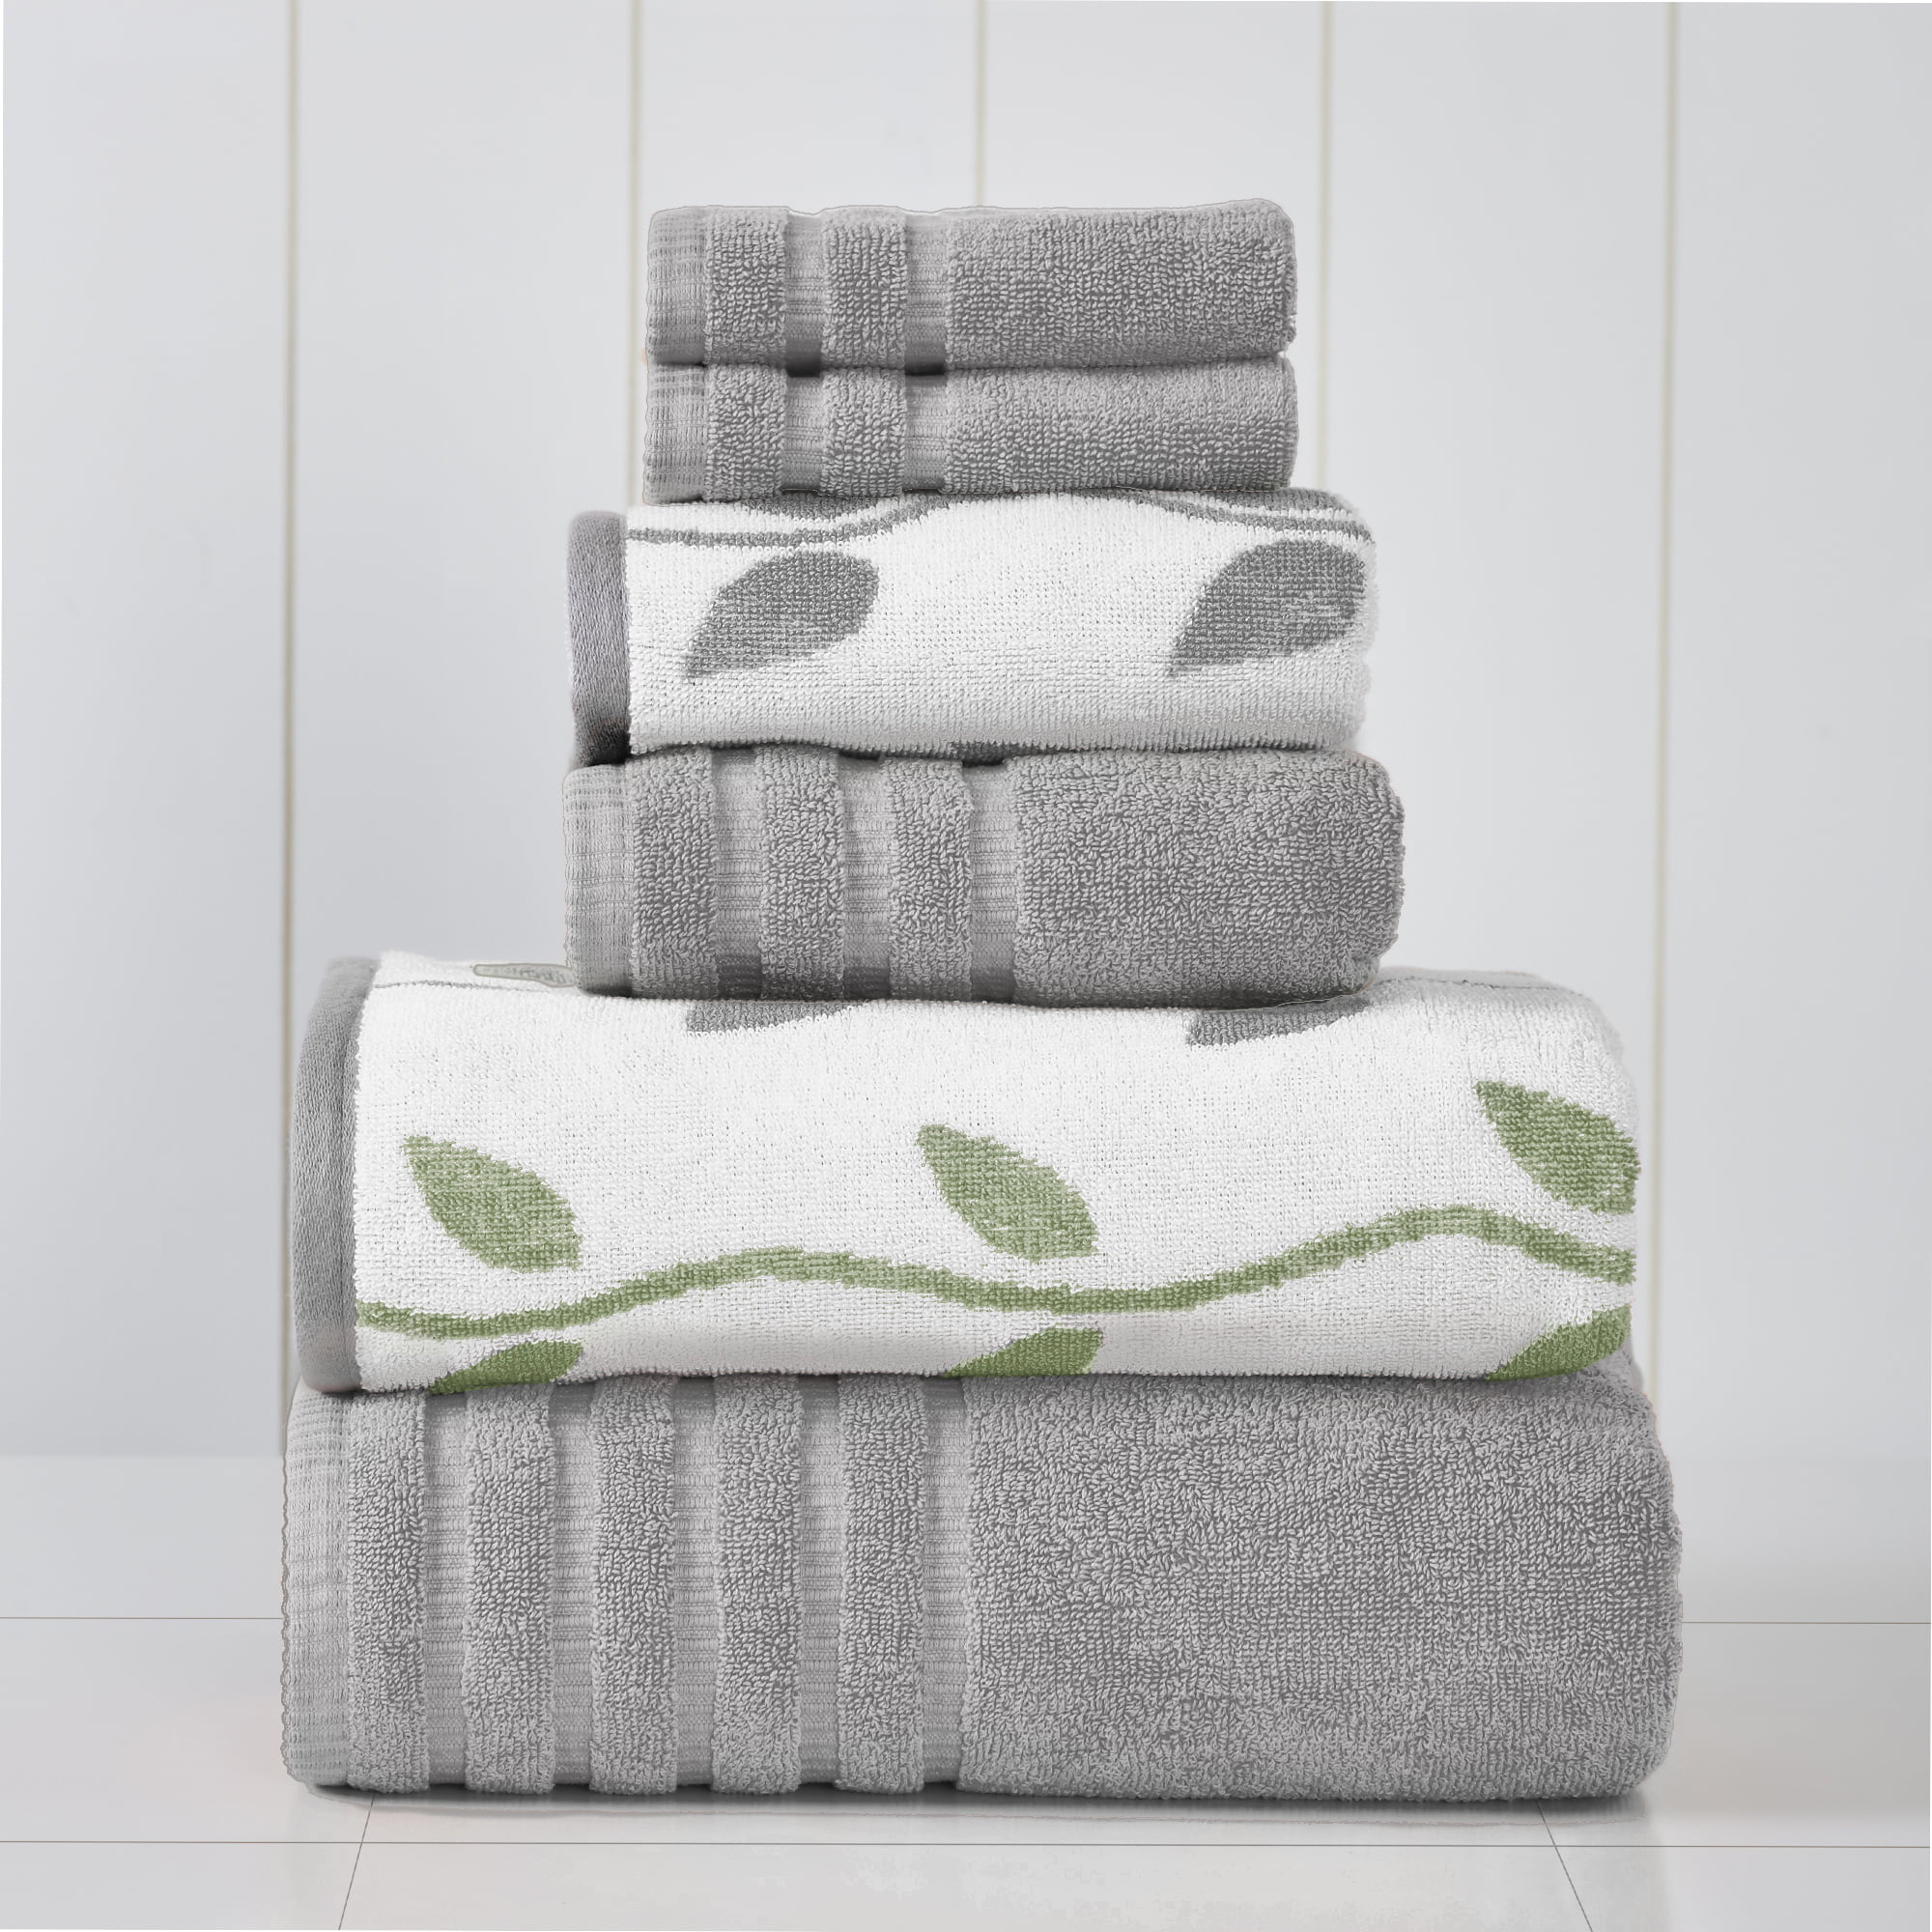 Bottle Green 500 GSM Egyptian Cotton Towels Luxury Combed Guest Hand Bath Stripe 